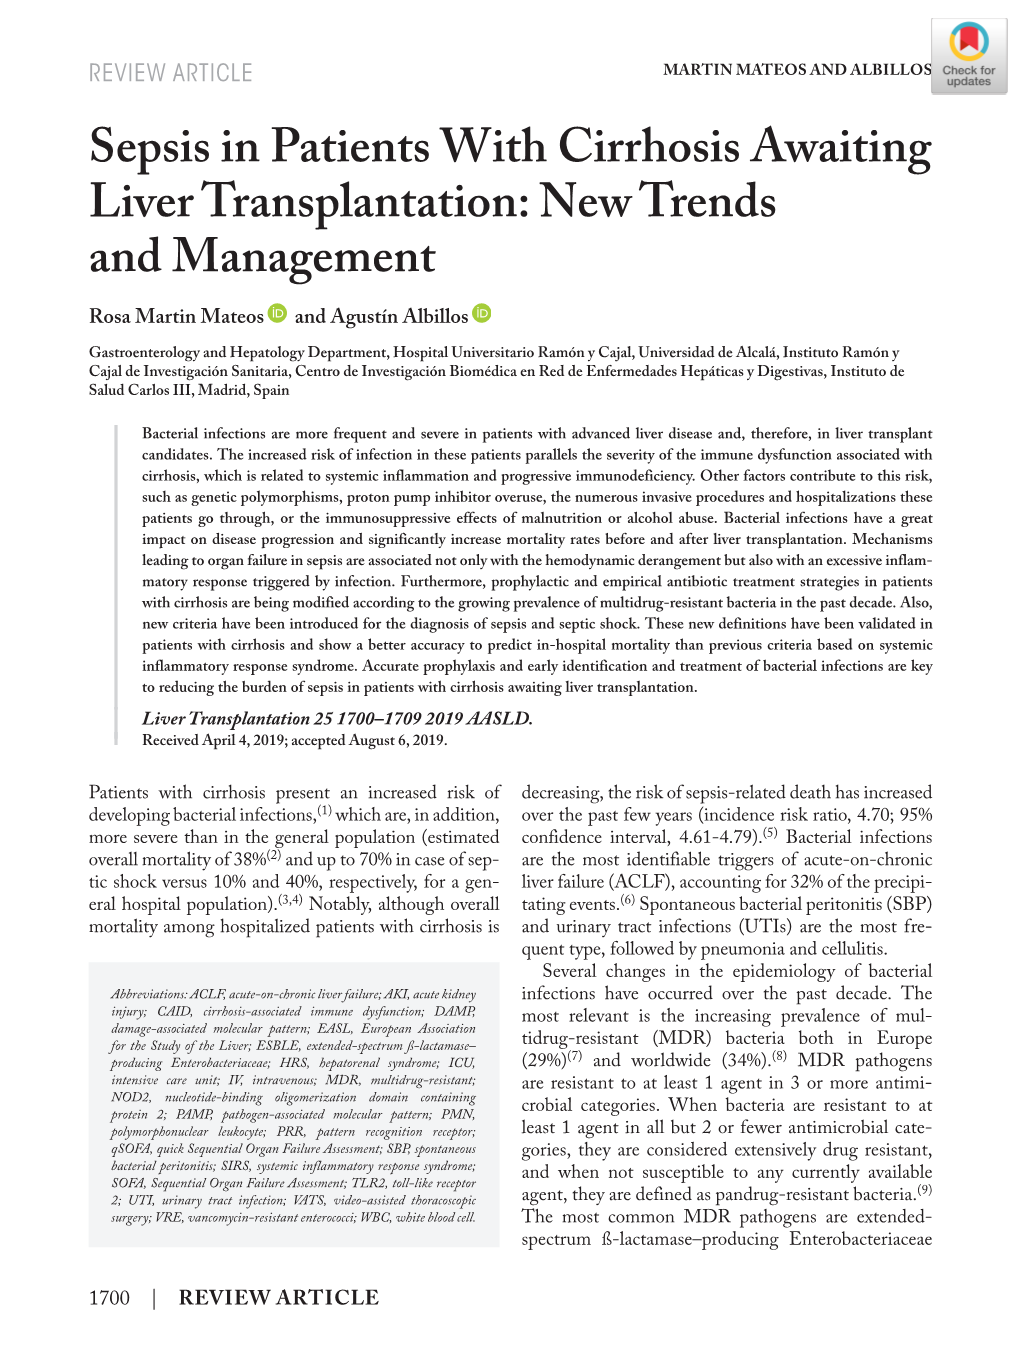 Sepsis in Patients with Cirrhosis Awaiting Liver Transplantation